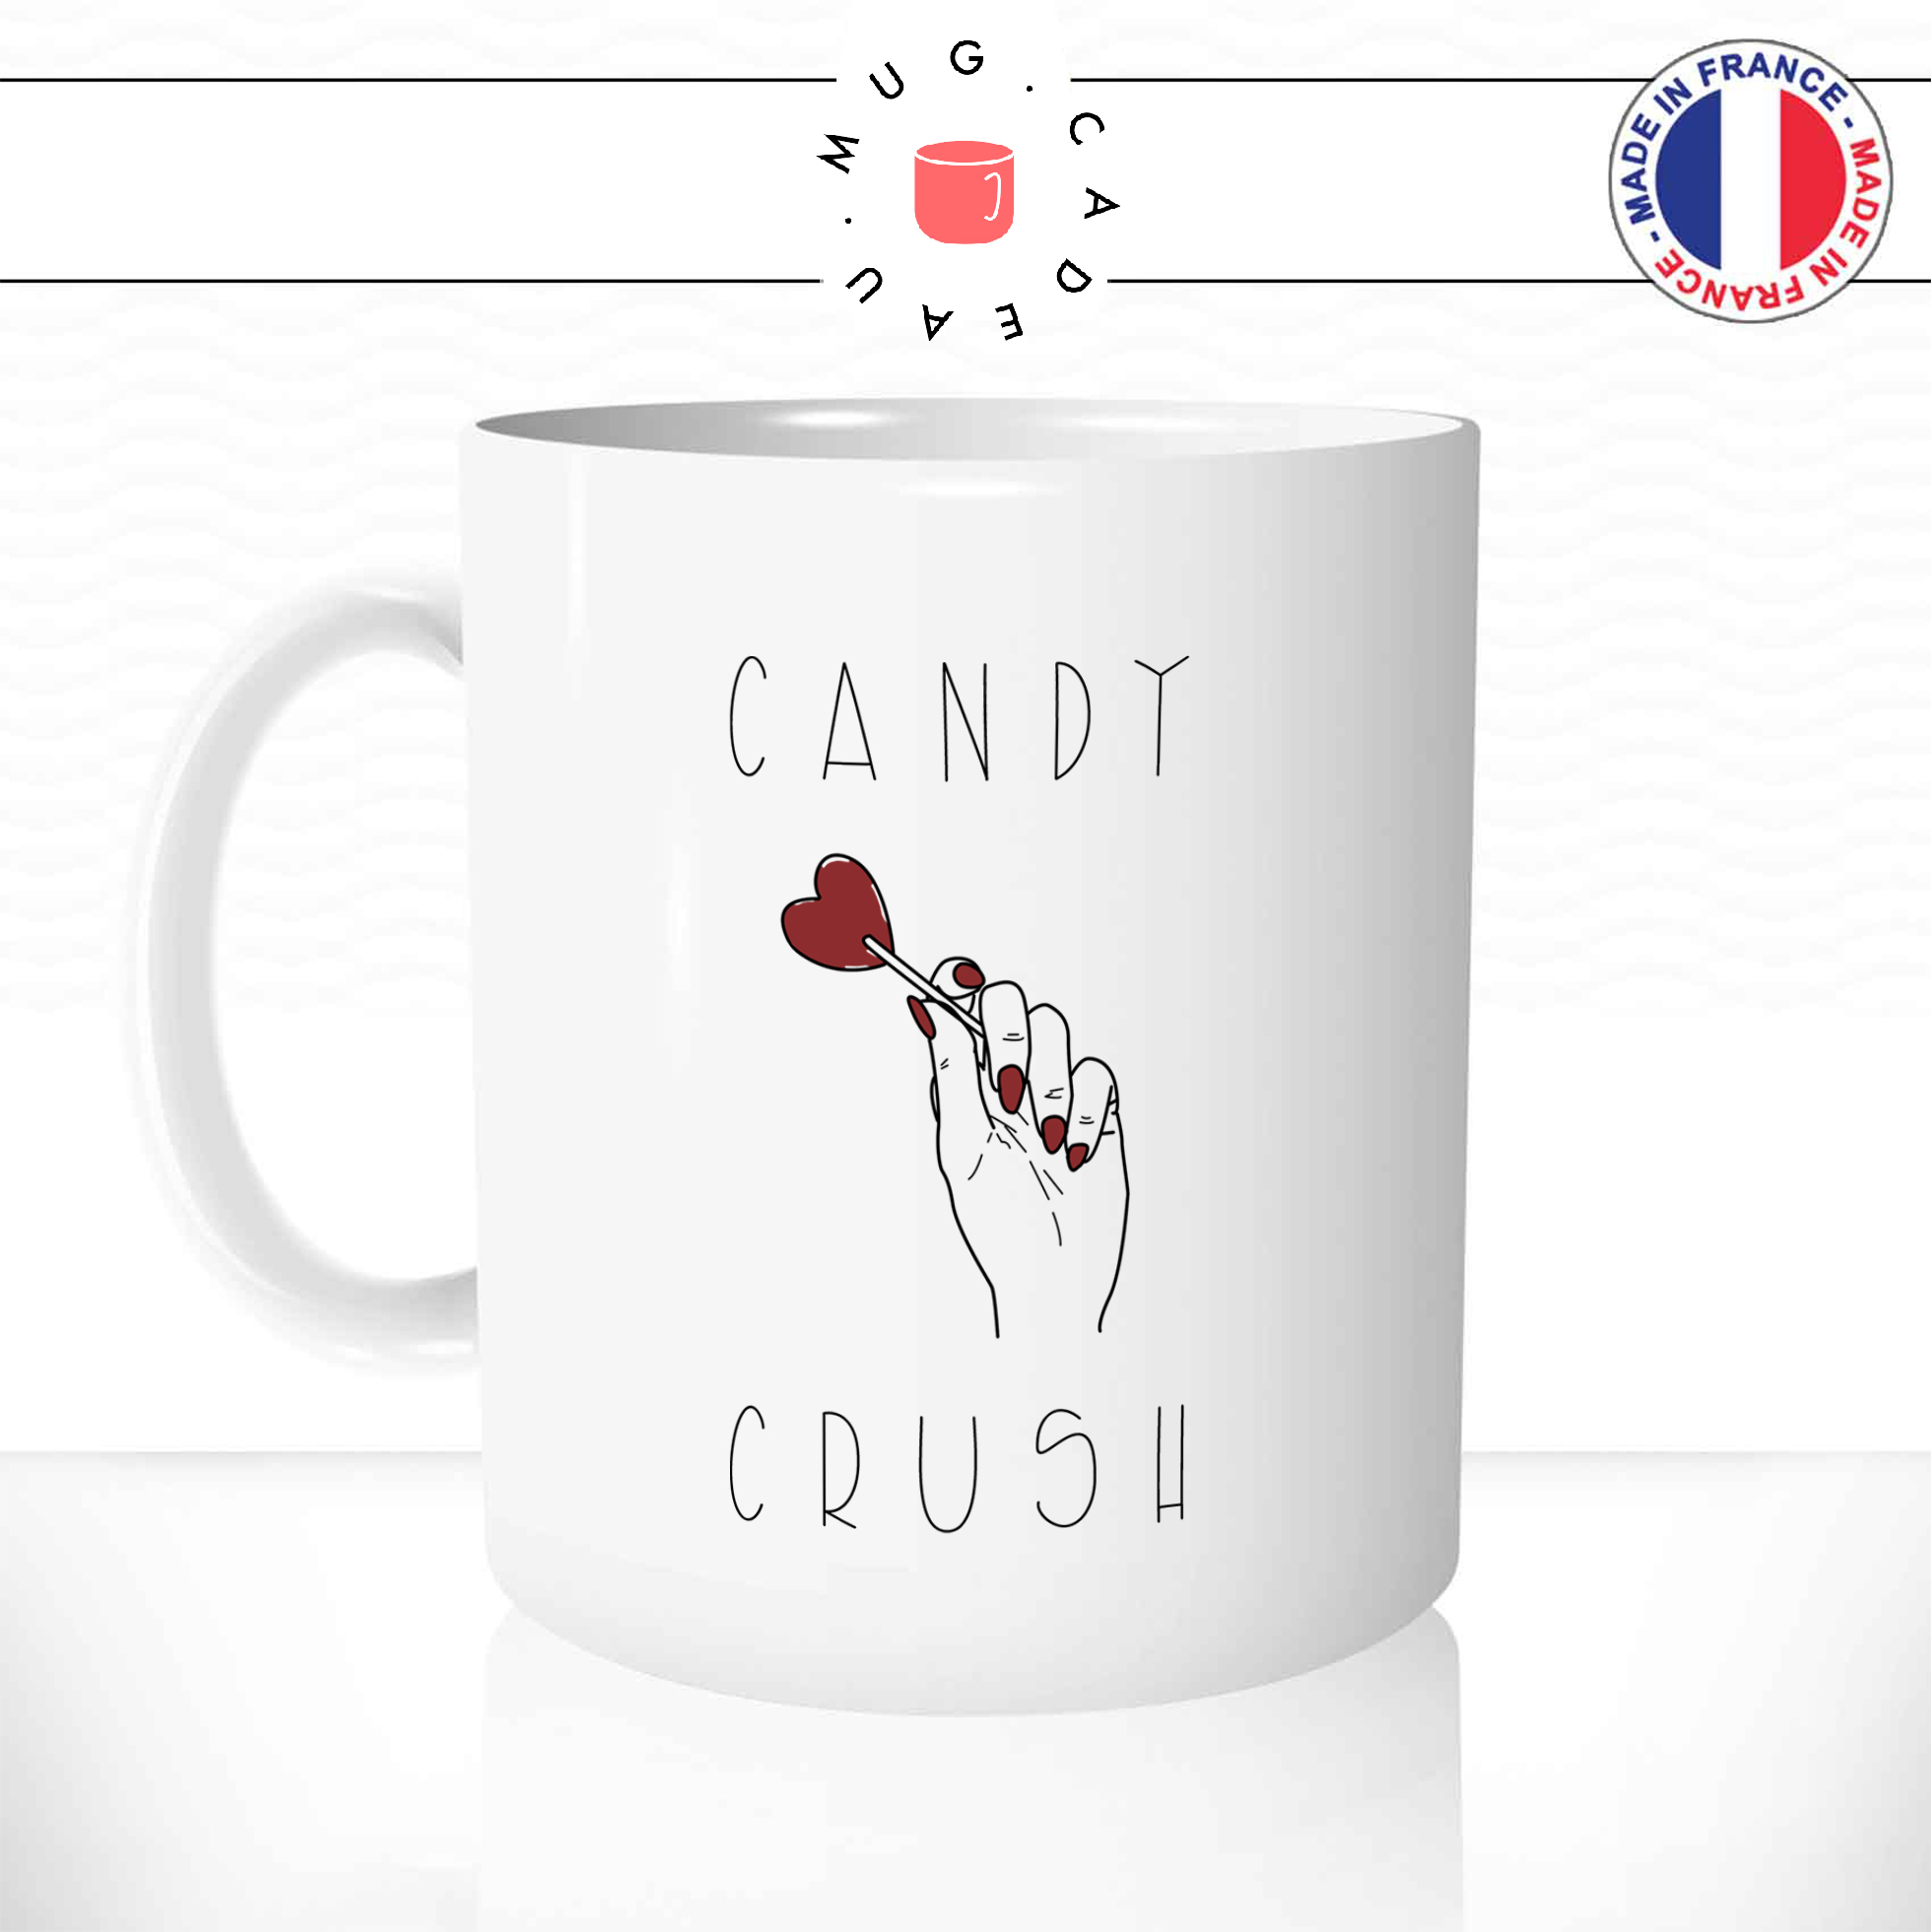 mug-tasse-ref35-mains-sucette-coeur-rouge-vernis-candy-crush-cafe-the-mugs-tasses-personnalise-anse-gauche